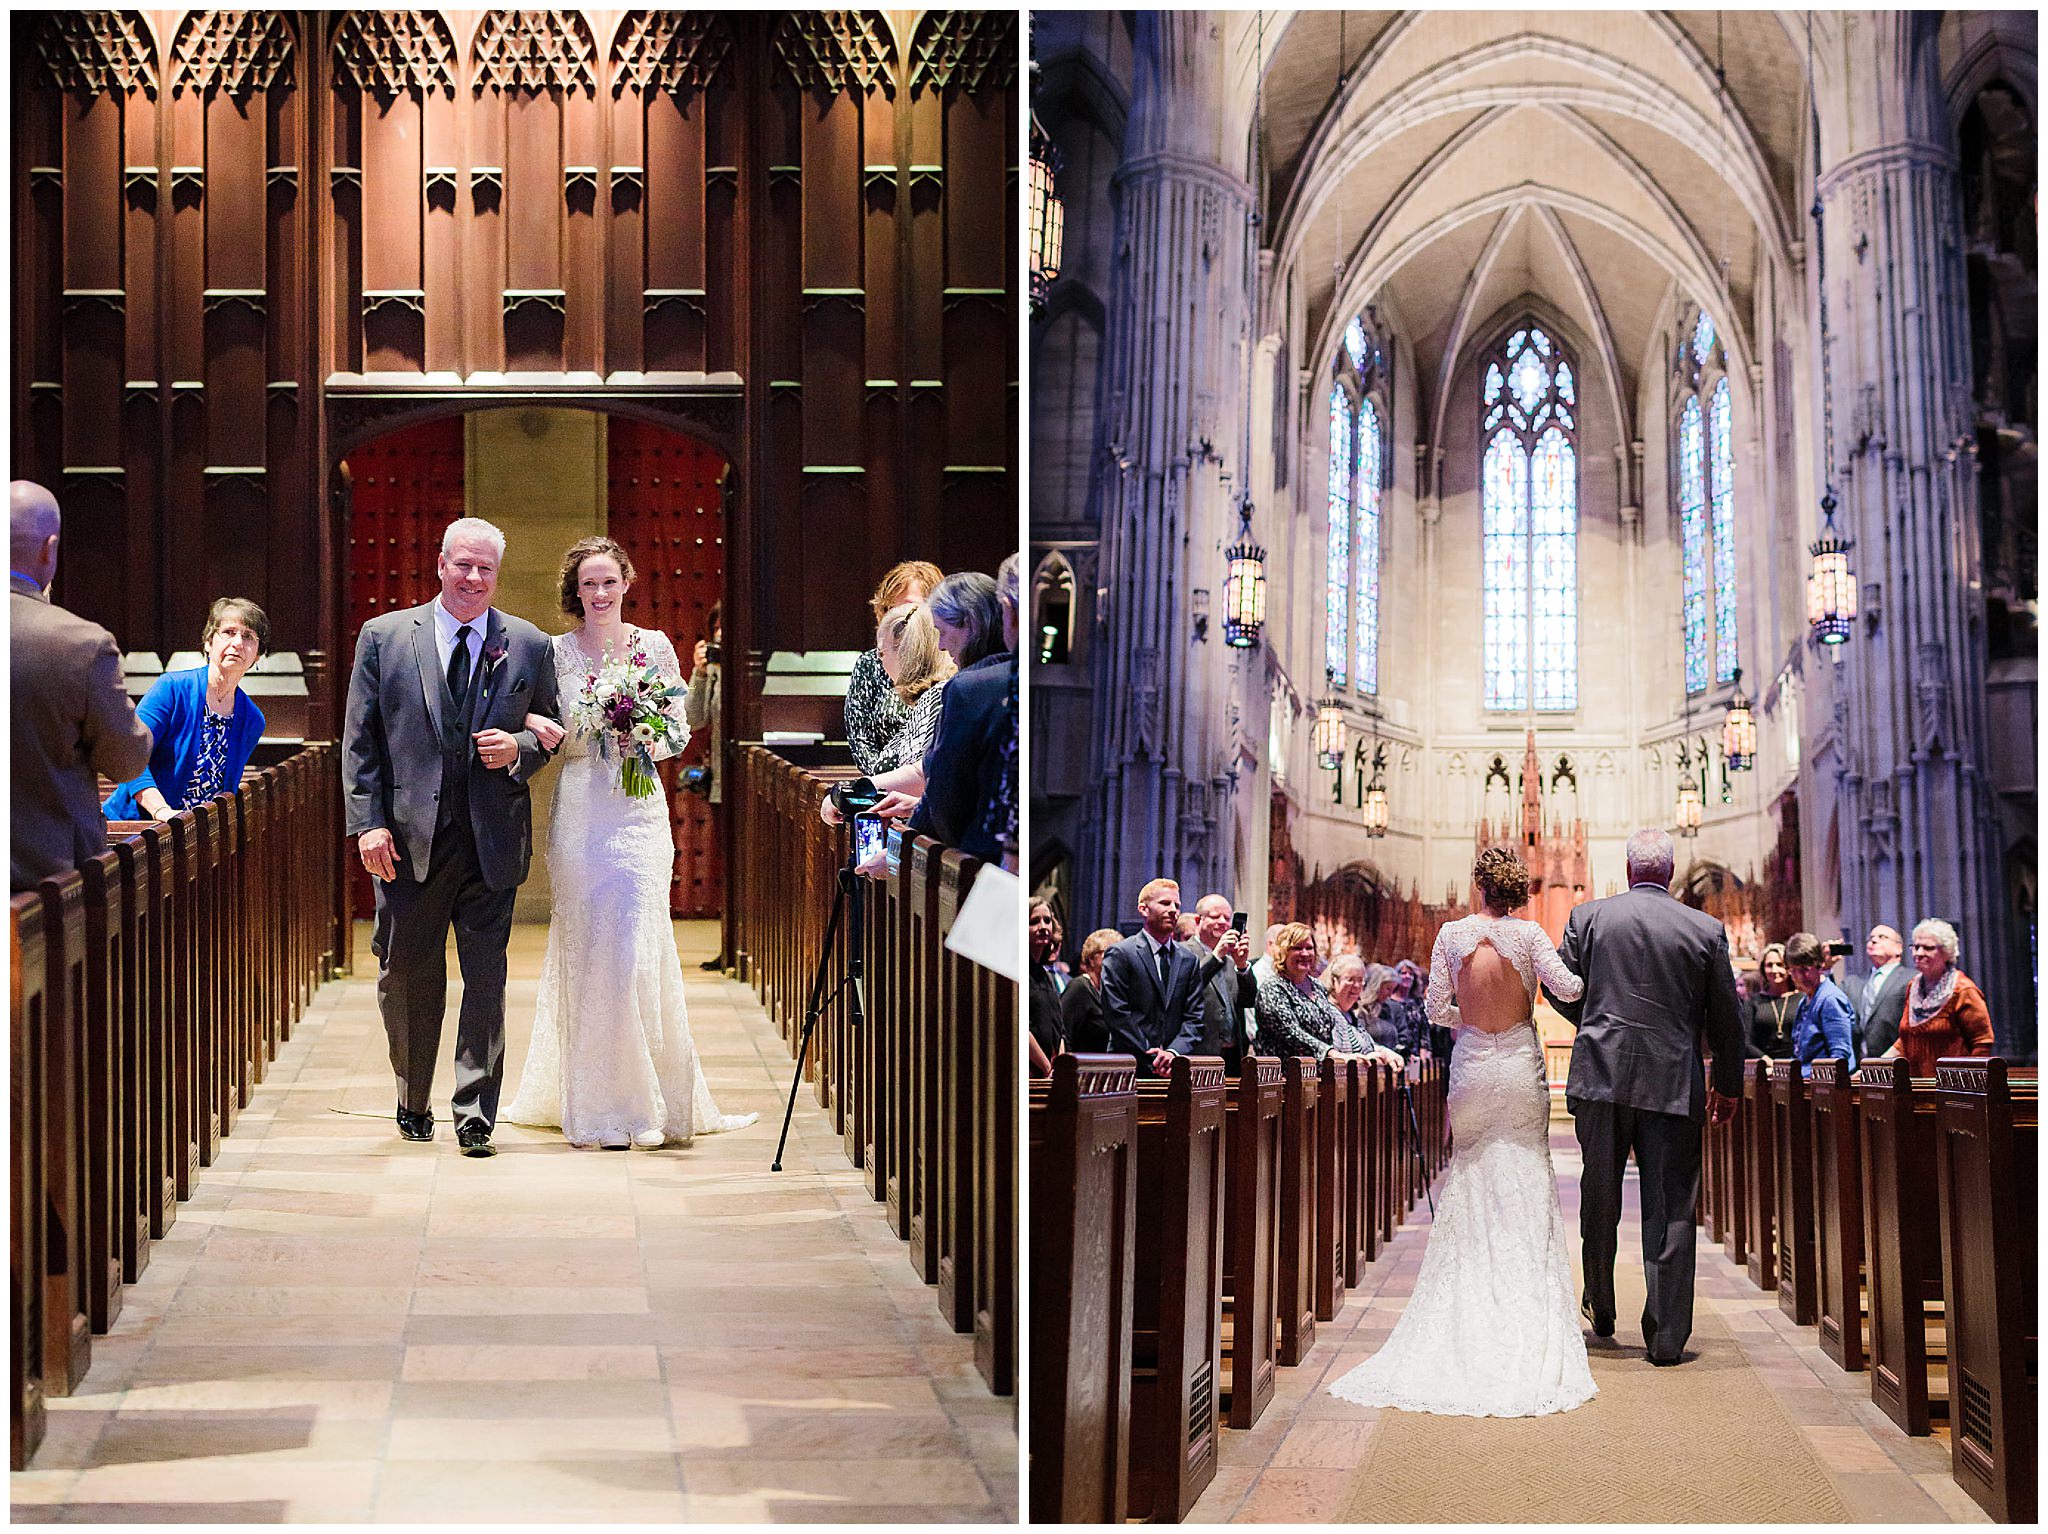 Bride walks down the aisle with her father at a Heinz Chapel wedding